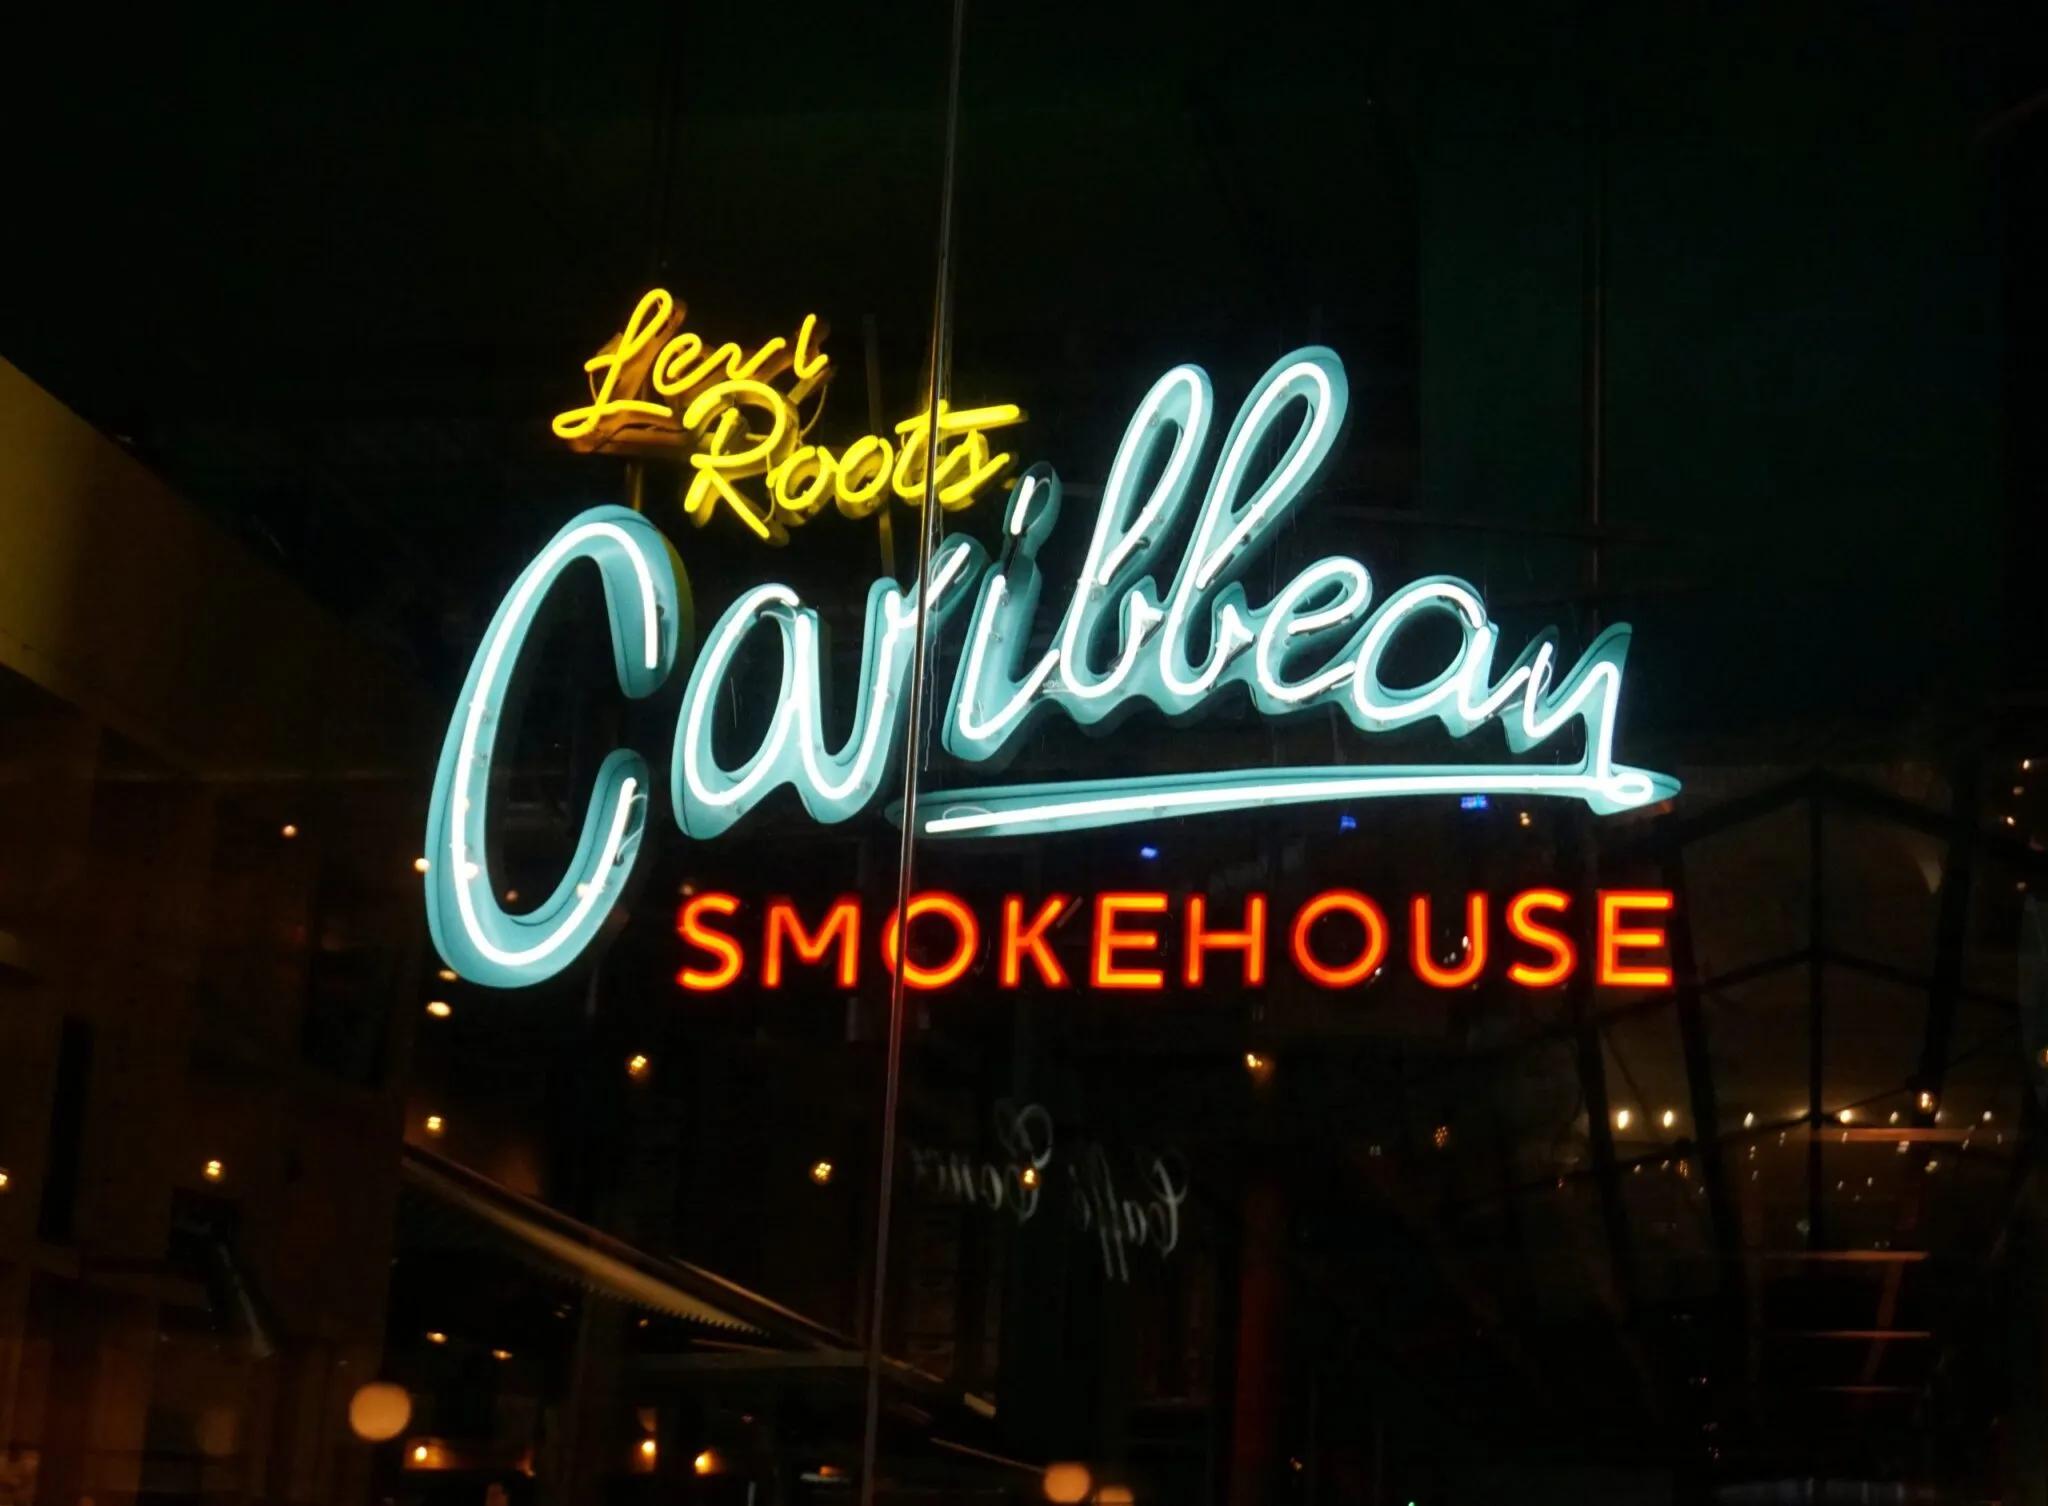 levi roots caribbean smokehouse - What is Levi Roots famous for